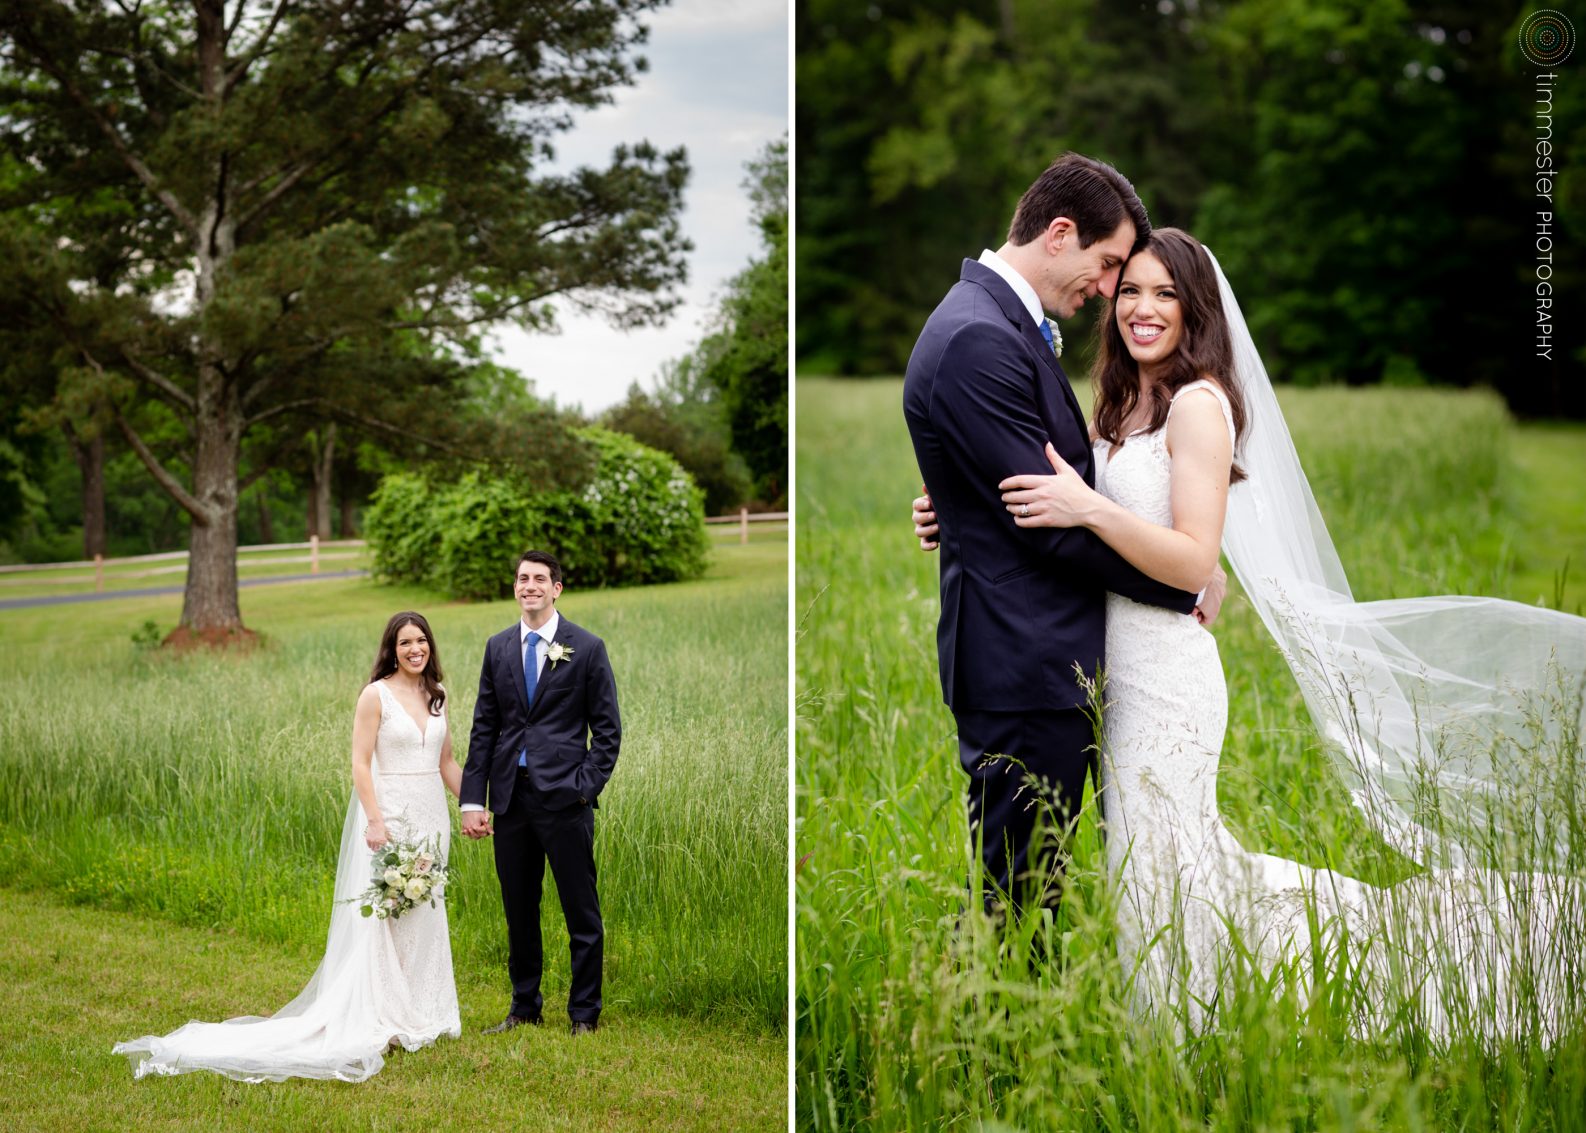 A Chapel Hill wedding at the Barn at Valhalla in NC.